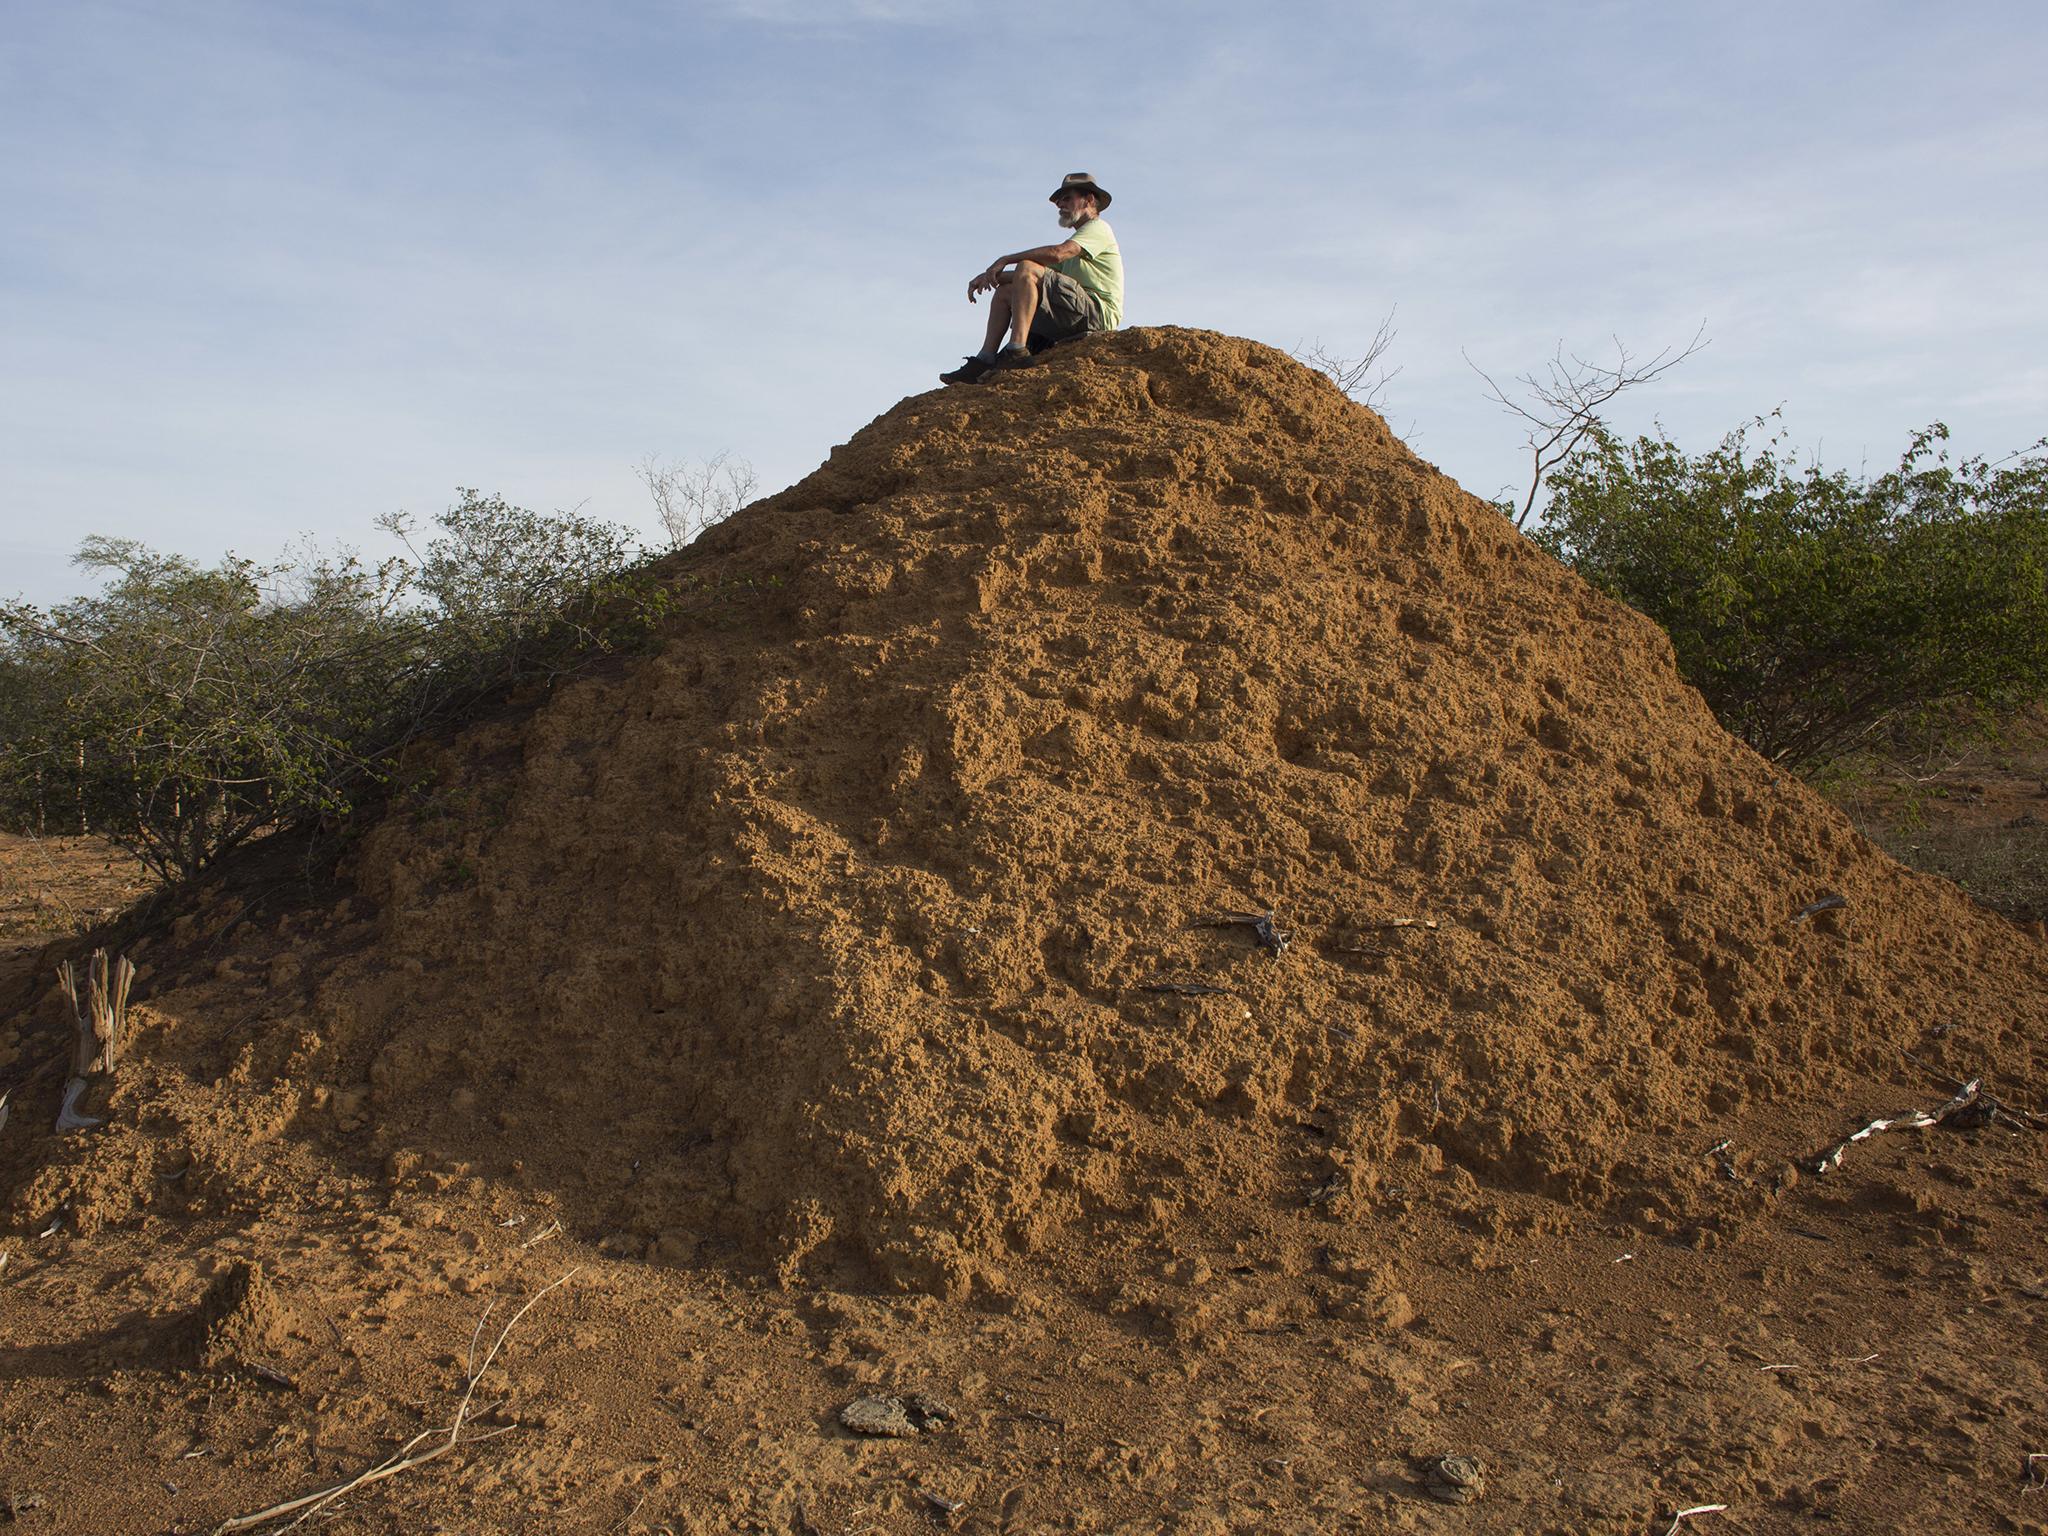 Botanist Roy Funch carried out radioactive dating to determine the age of the giant termite mounds near Palmeiras